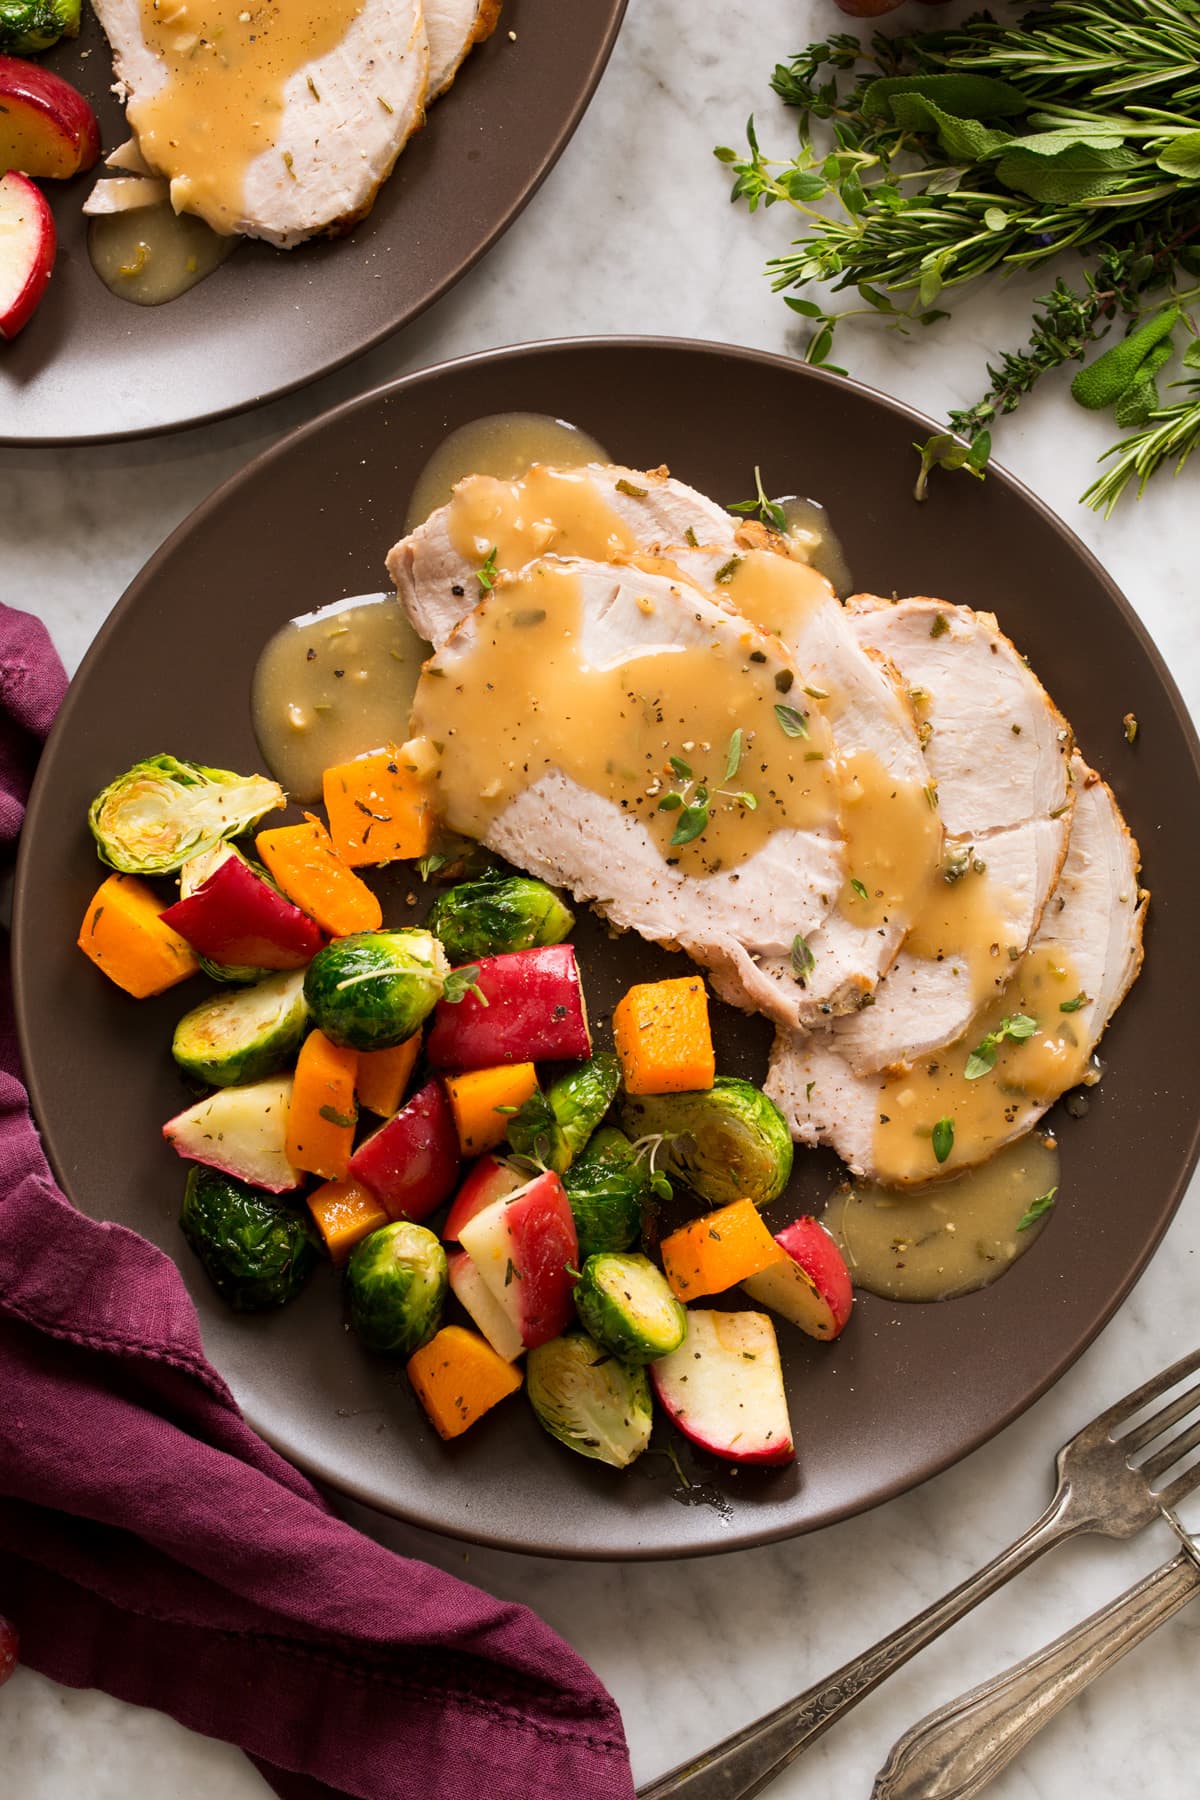 Pork loin shown cooked and sliced with gravy atop. Shown on a brown plate with a side of roasted vegetables and apples.